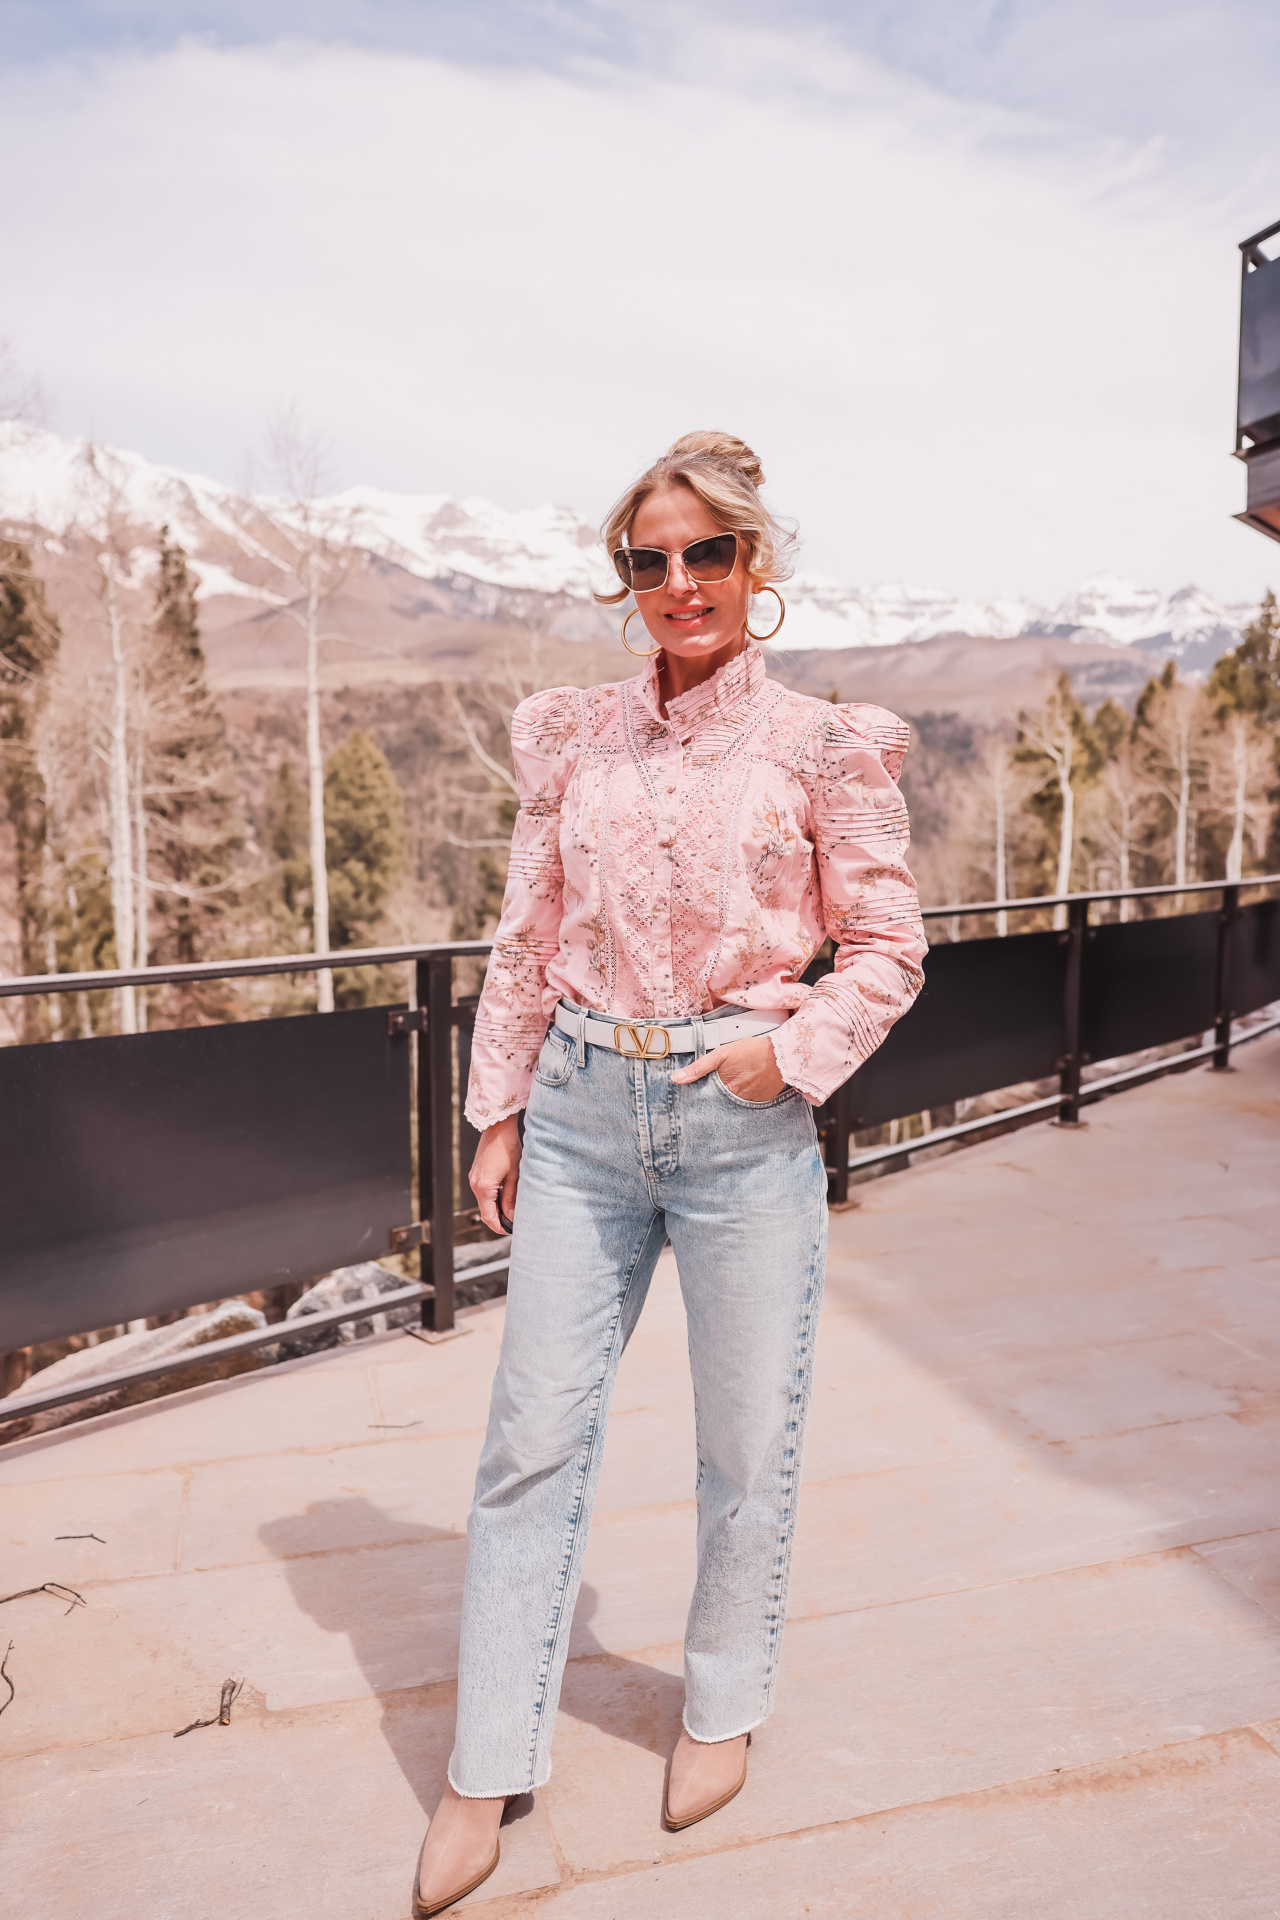 summer self care, summer self care essentials, sun protection, maui jim sunglasses, polarized sunglasses, puakenikeni sunglasses by maui jim, erin busbee, busbee style, telluride, colorado, loveshackfancy pink floral blouse, alice + olivia wide leg jeans, vince camuto booties, dean davidson gold hoops